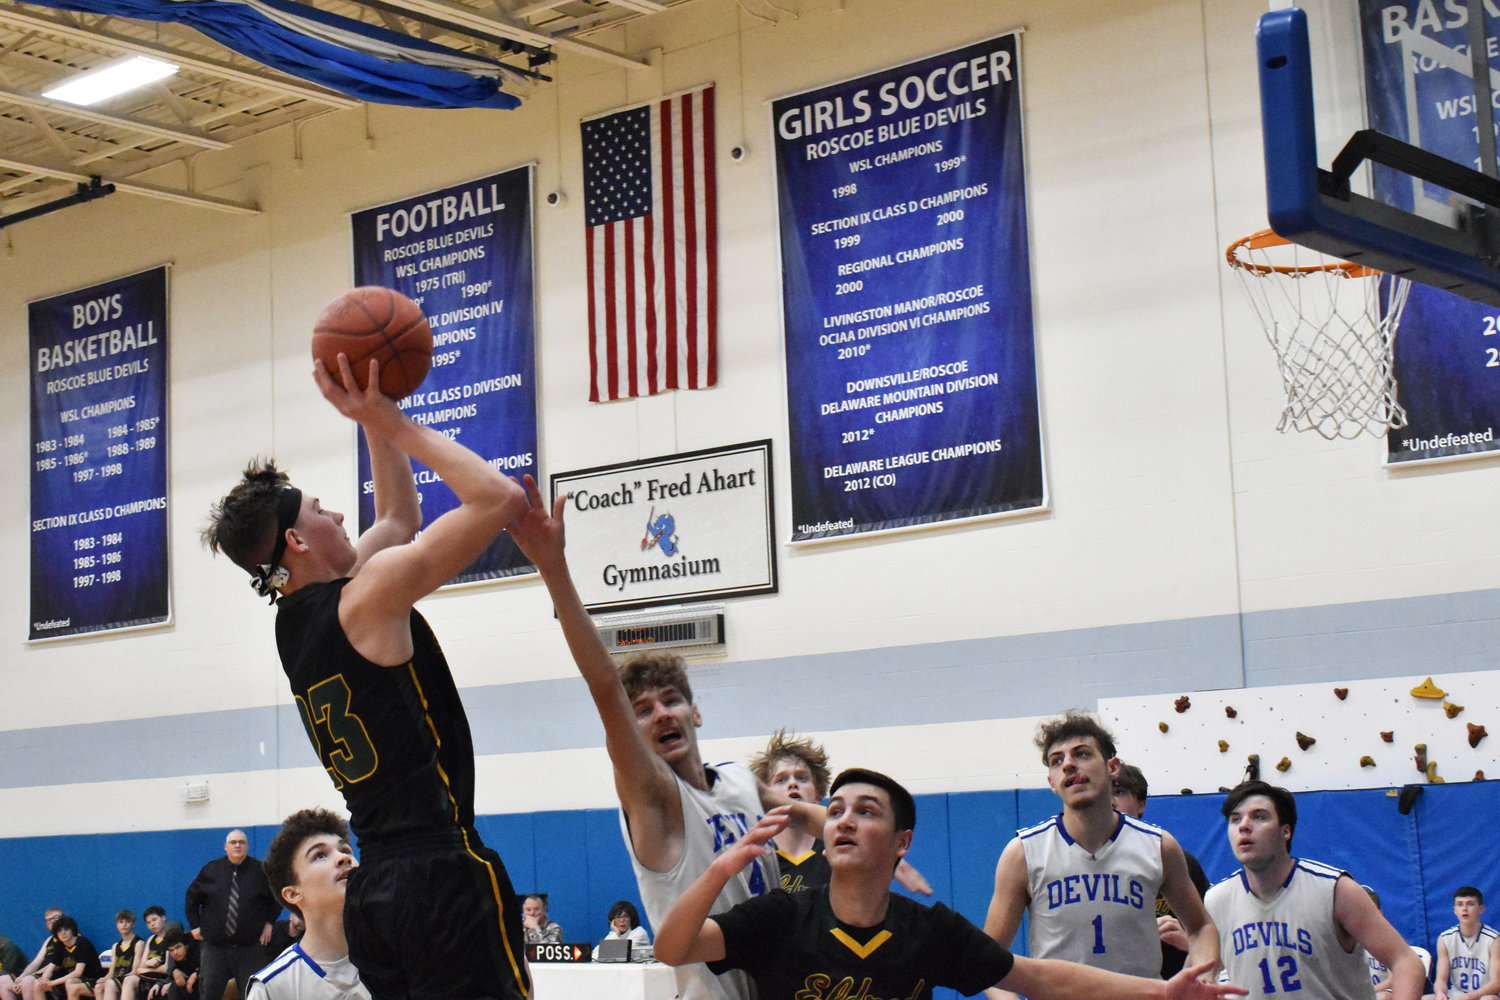 Eldred’s Sean Furler made his presence known in the Sectional matchup against Roscoe as Anthony Zamenick attempts to get close enough to contest the shot.